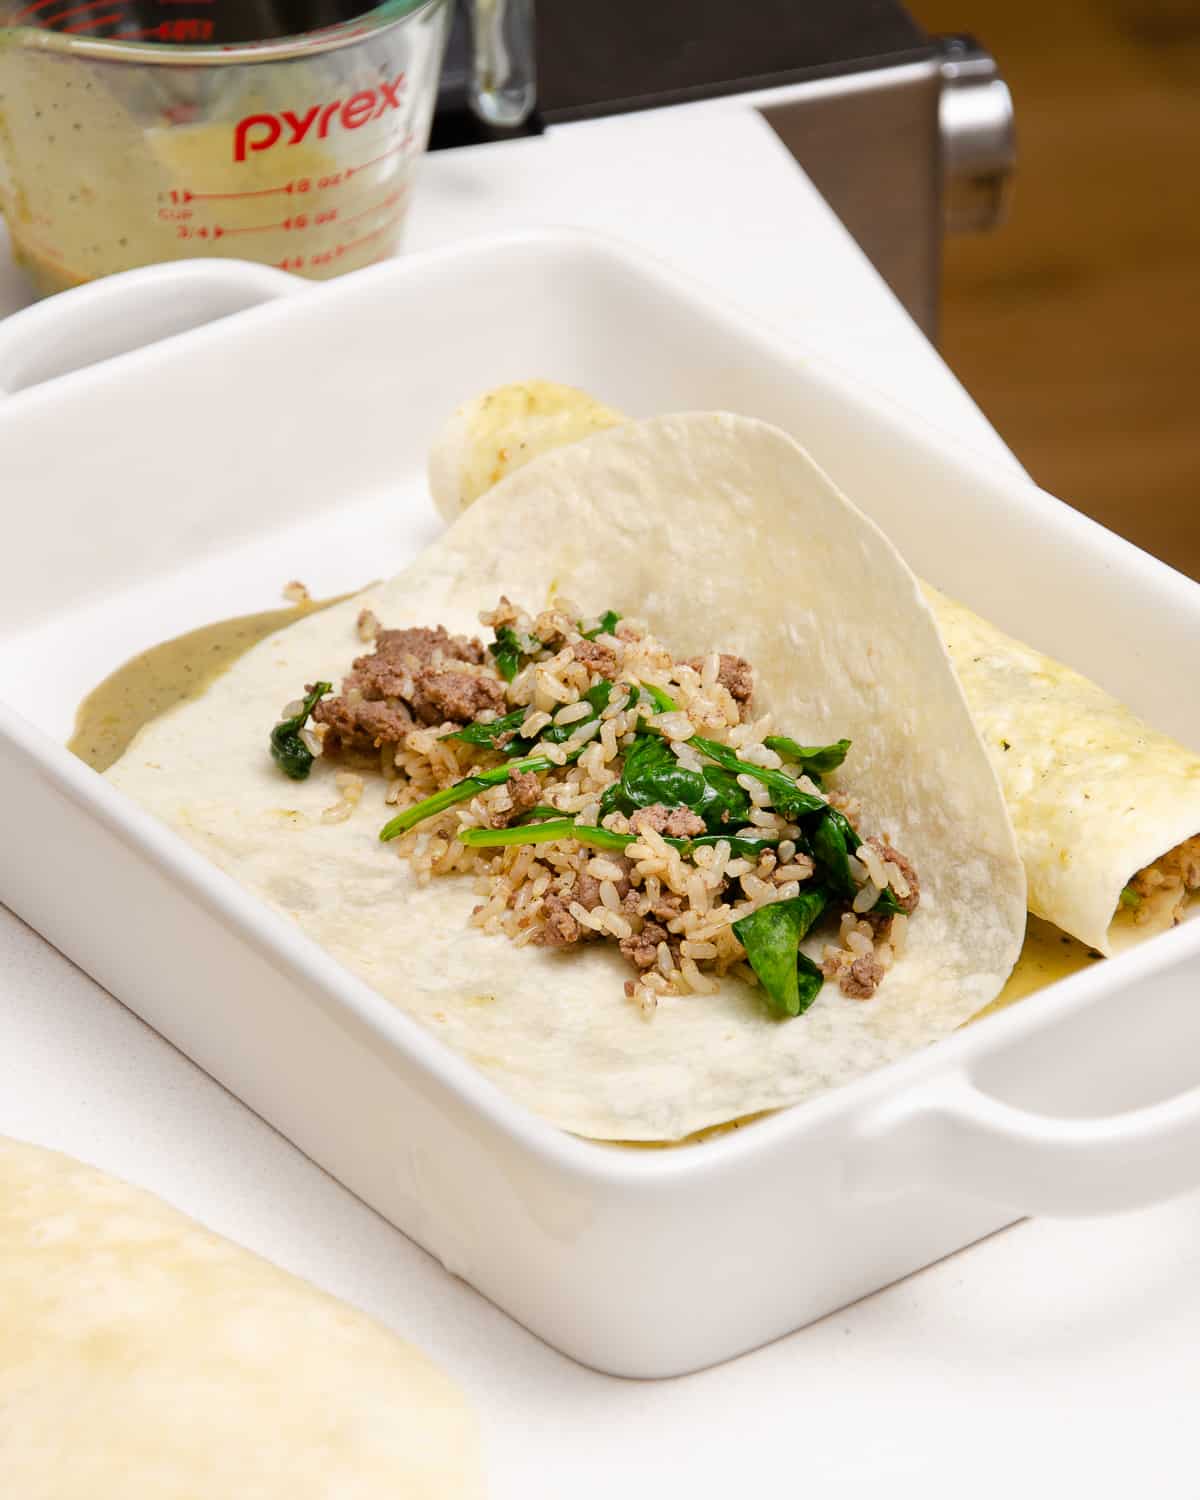 A tortilla filled with rice, ground beef, and spinach in a casserole baking dish.